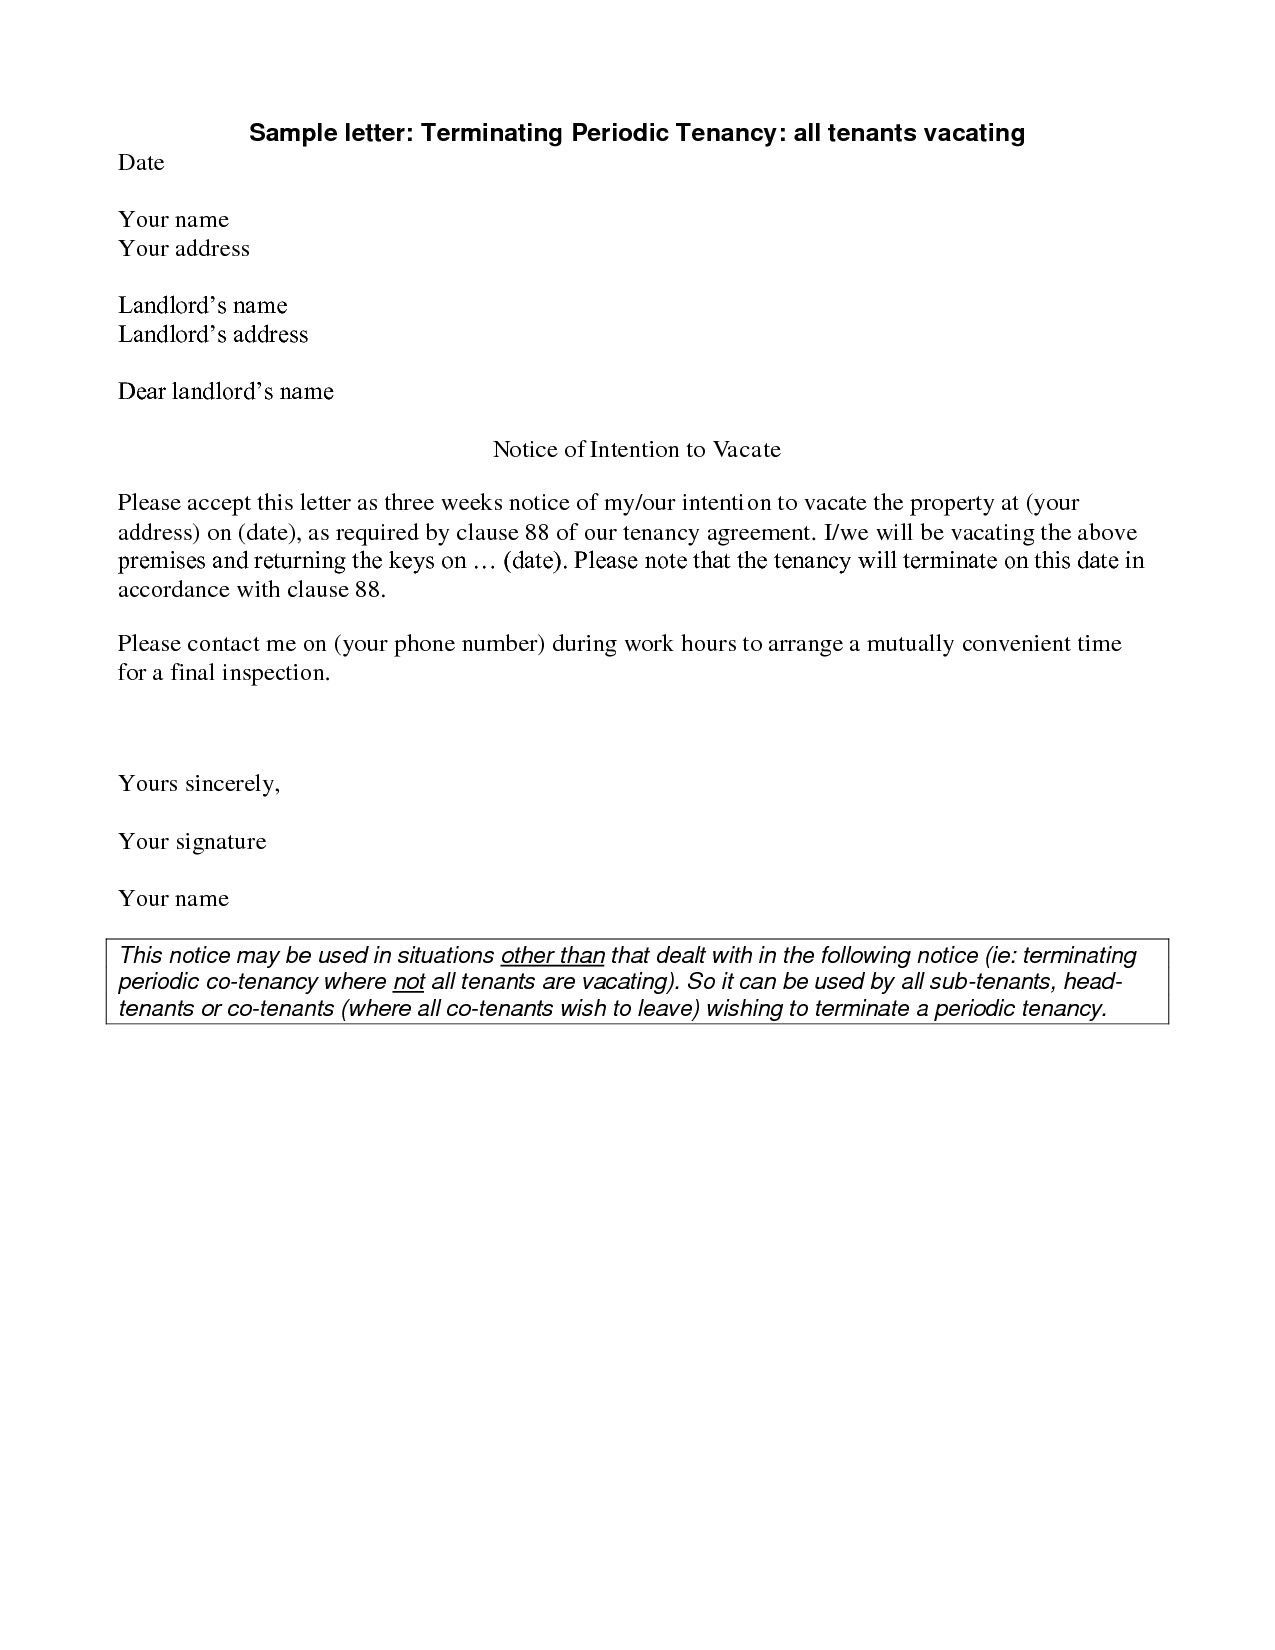 giving-notice-to-tenants-letter-template-collection-letter-template